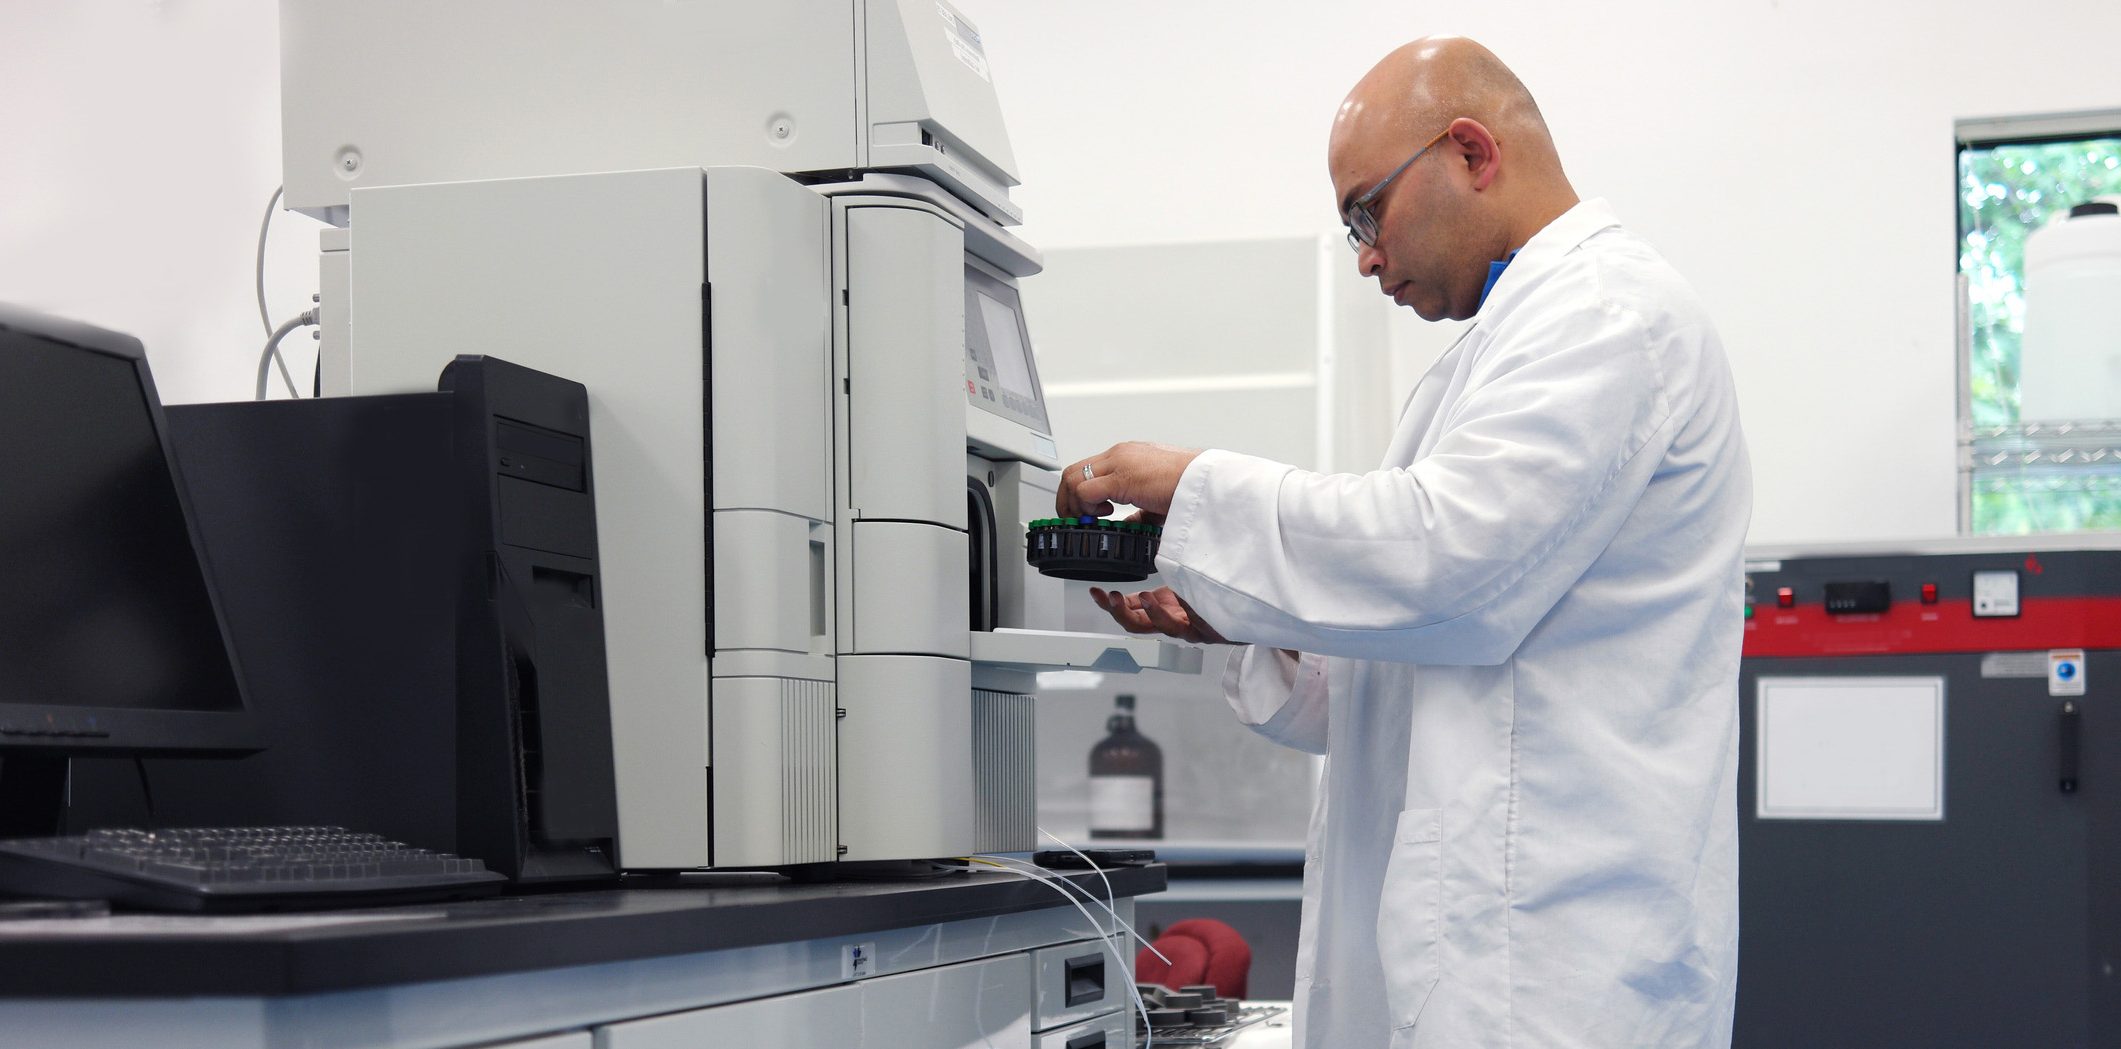 Man using an HPLC device to test samples in a lab, something made easier when the tests have been planned in advance